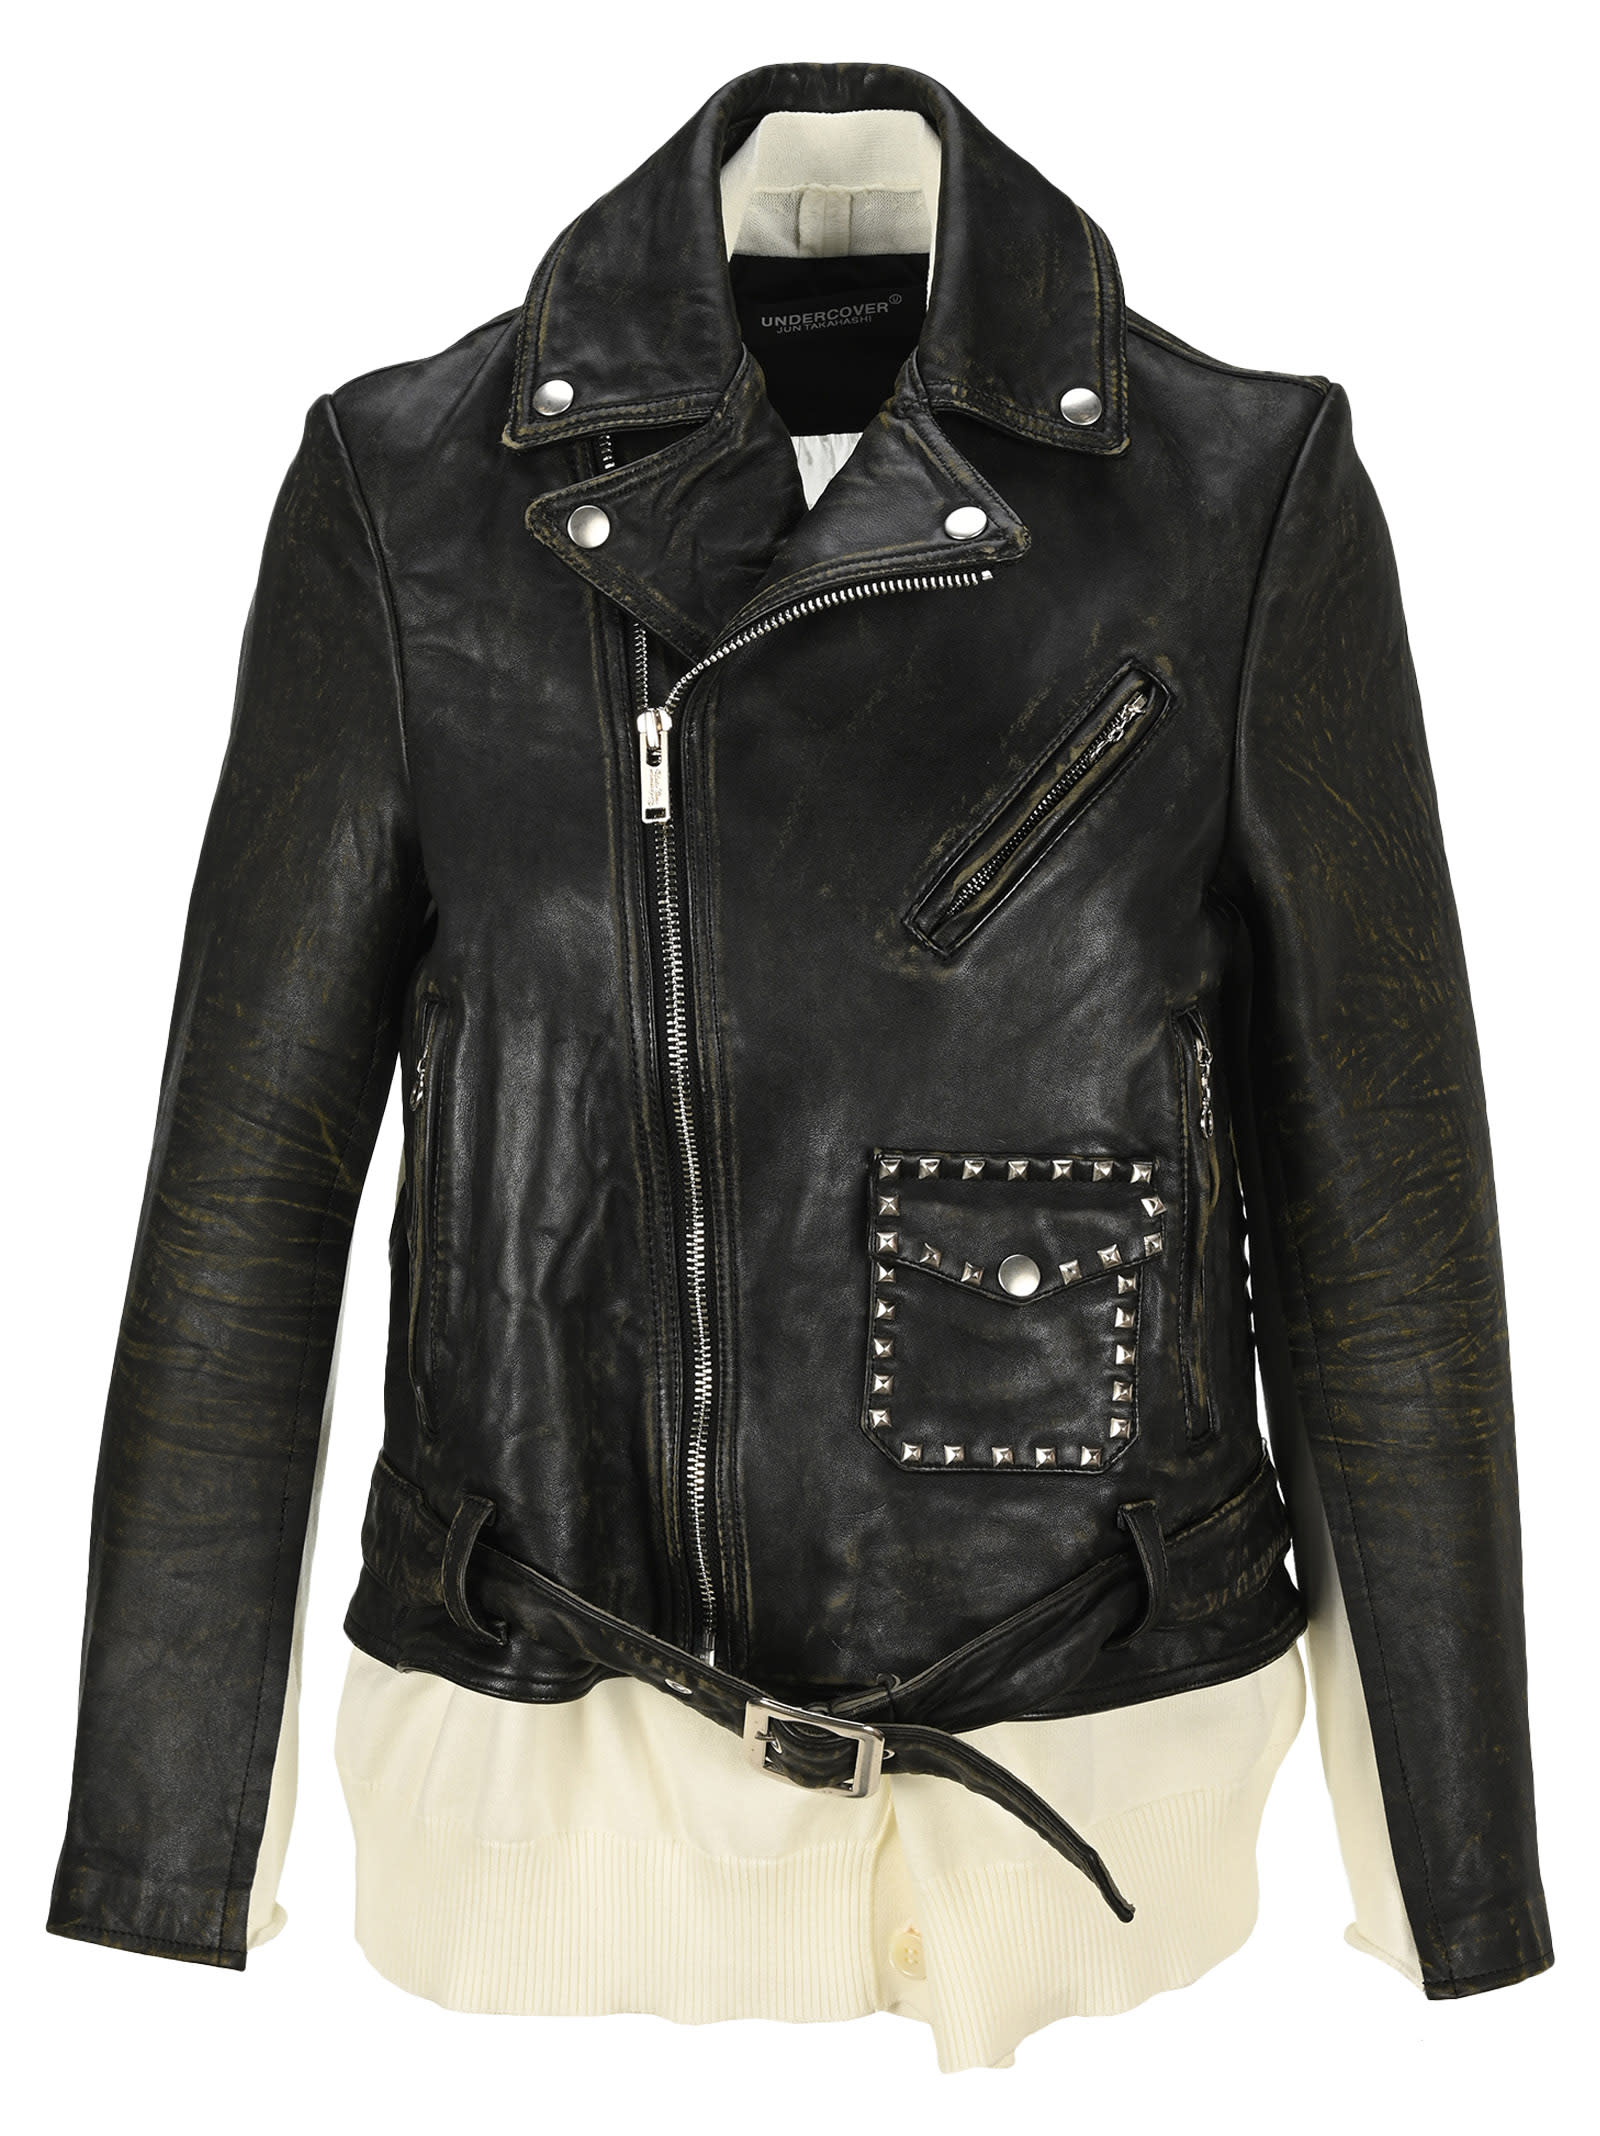 Undercover Jun Takahashi Undercover Stud Leather Jacket